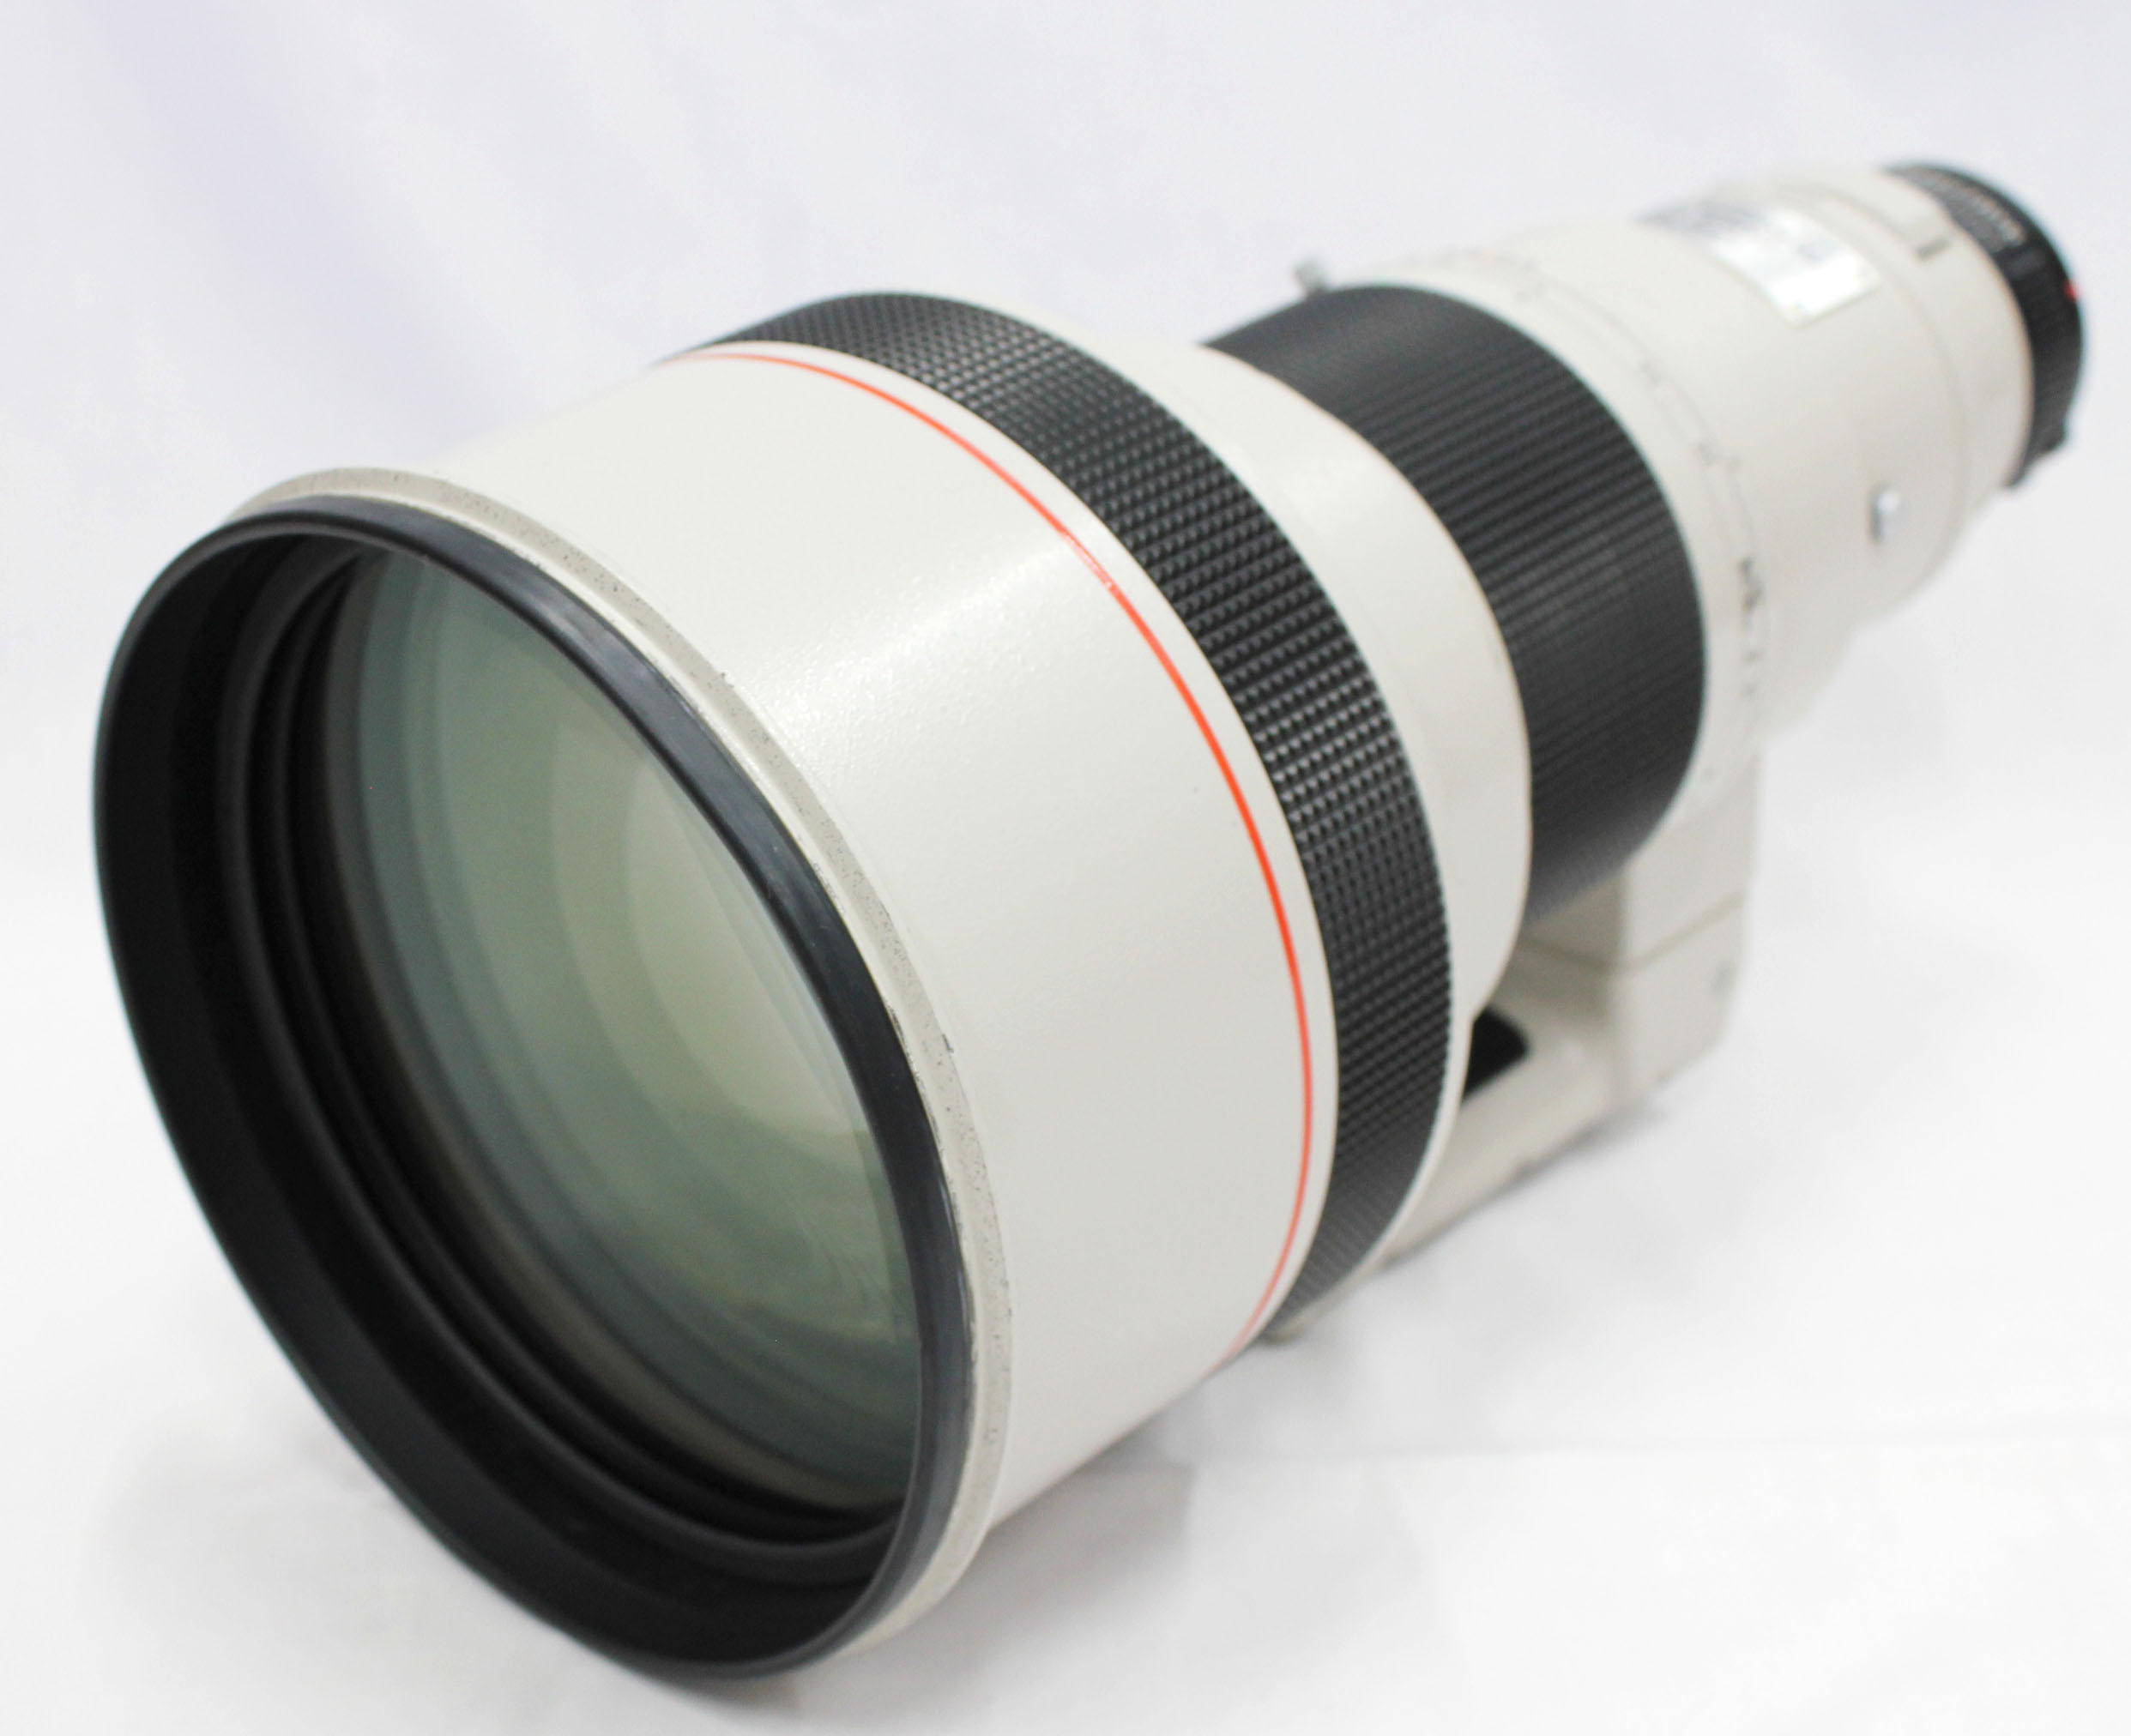  Canon New FD NFD 400mm F/2.8 L MF Telephoto Lens from Japan Photo 1